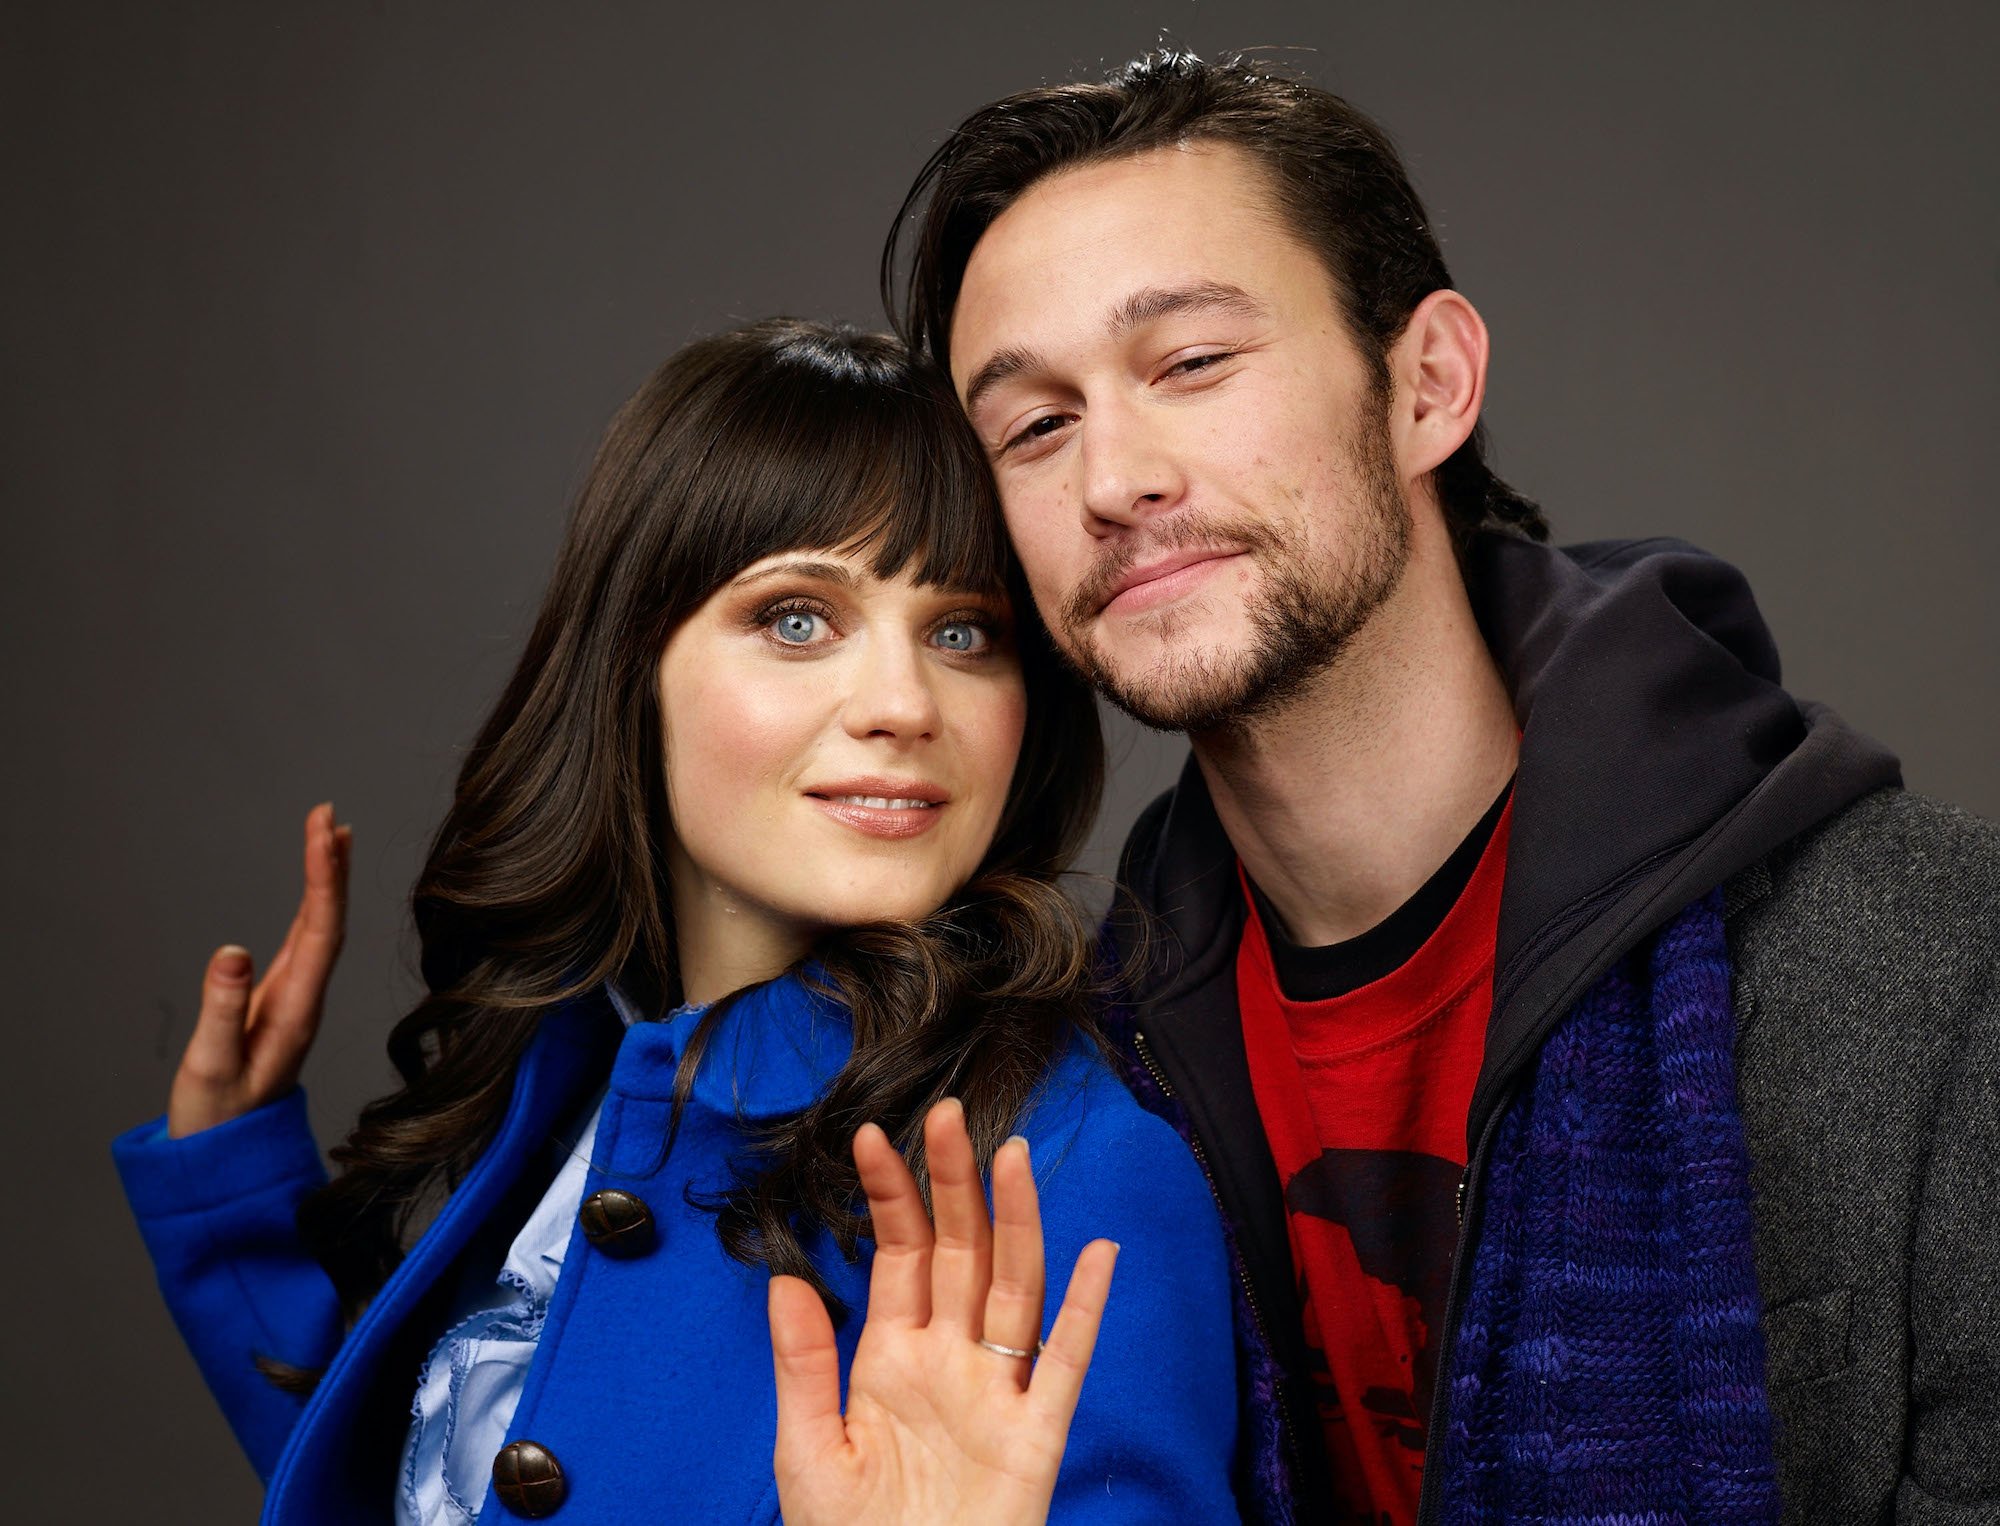 Zooey Deschanel and Joseph Gordon-Levitt smiling in front of a gray background